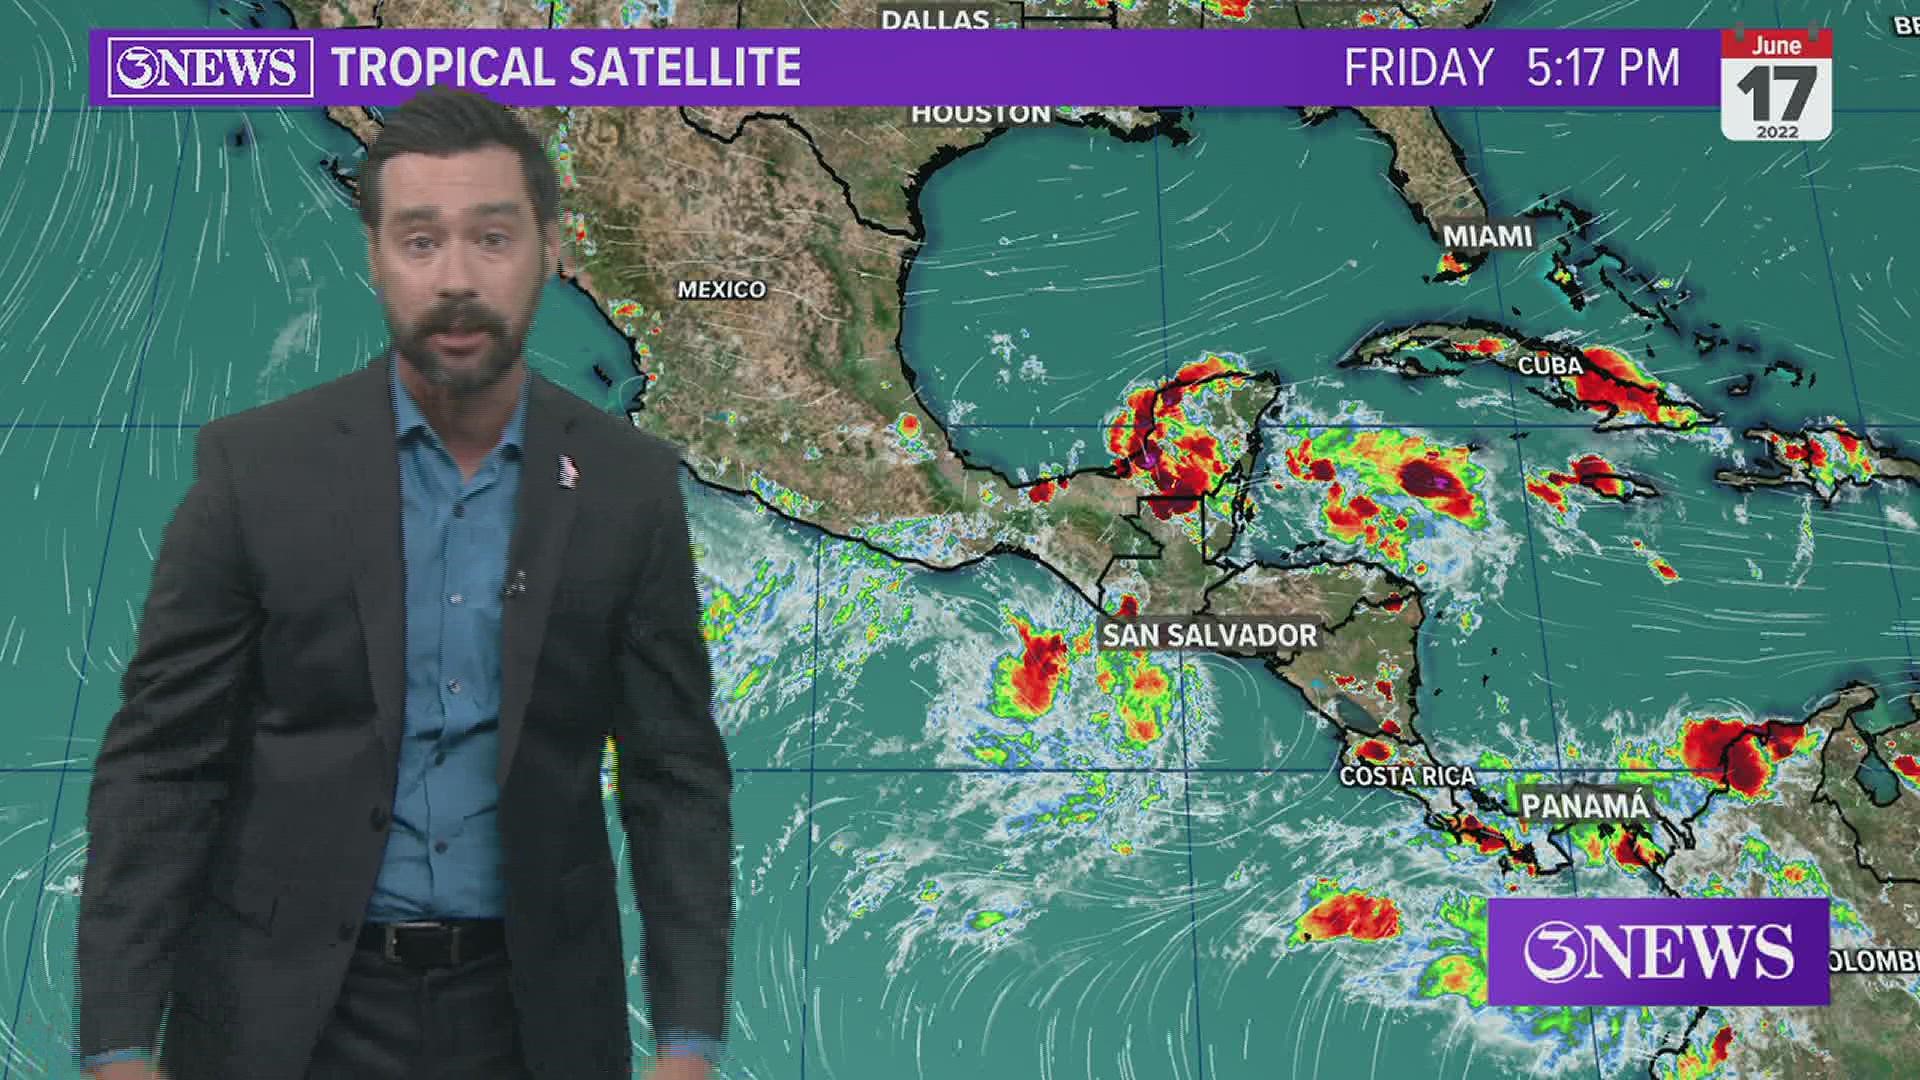 None of the three tropical systems around Central America pose a threat to Texas over the next 5-7 days.